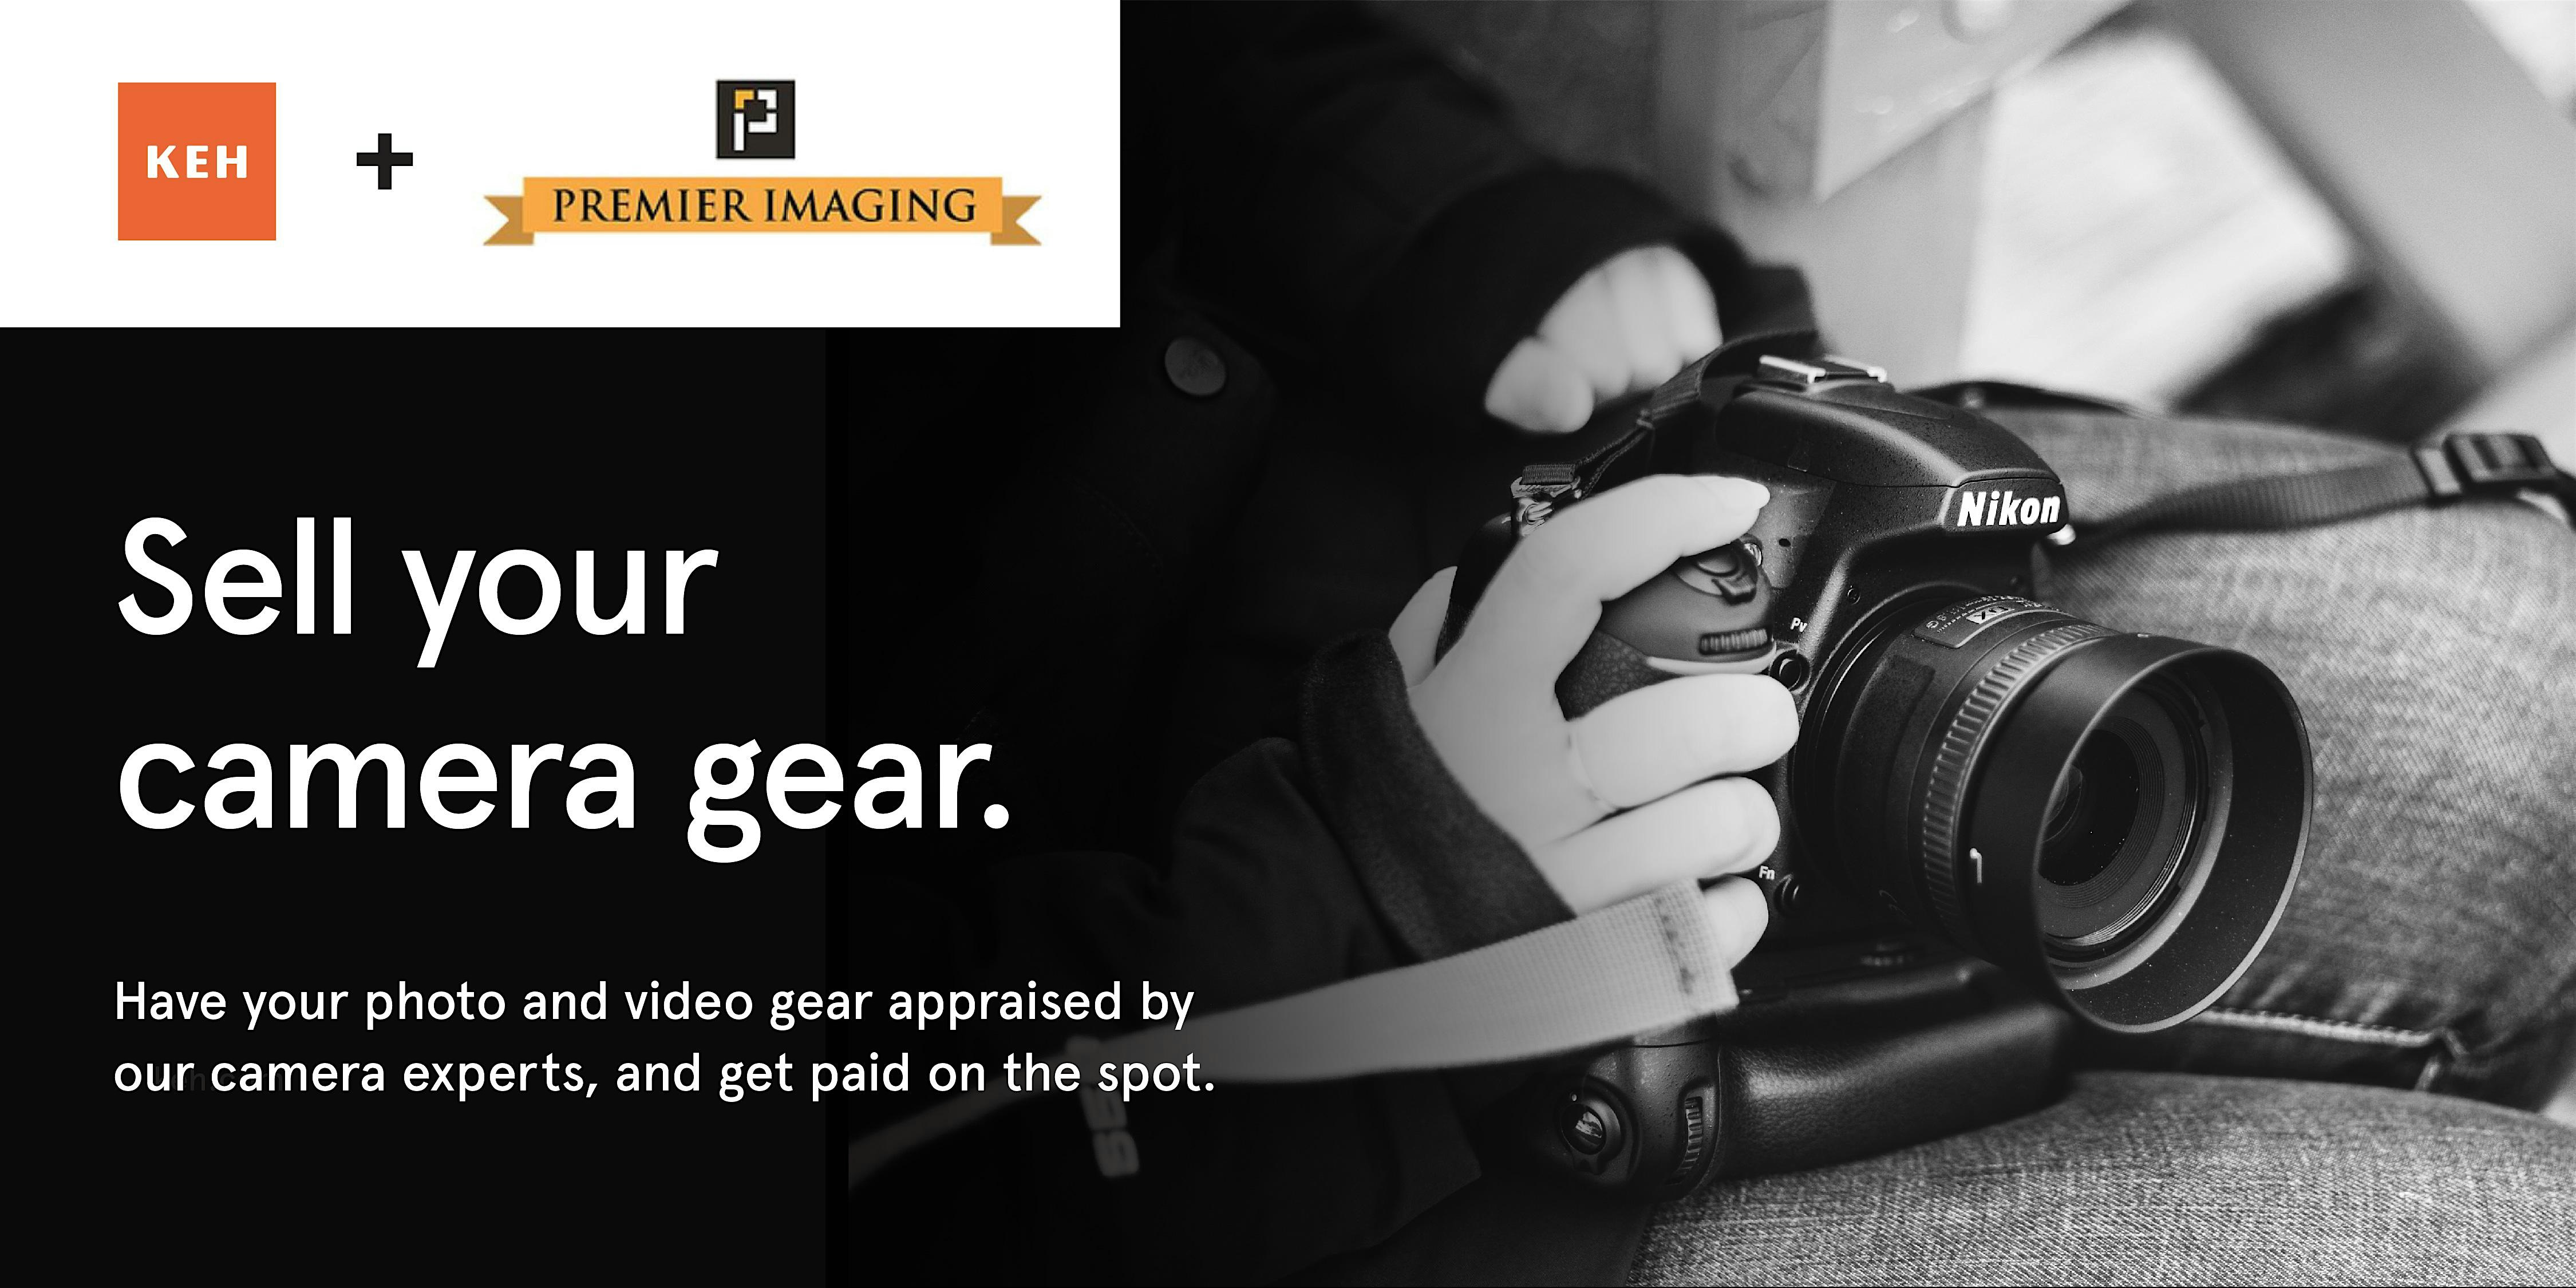 Sell your camera gear (free event) at Premier Imaging Bethel Park